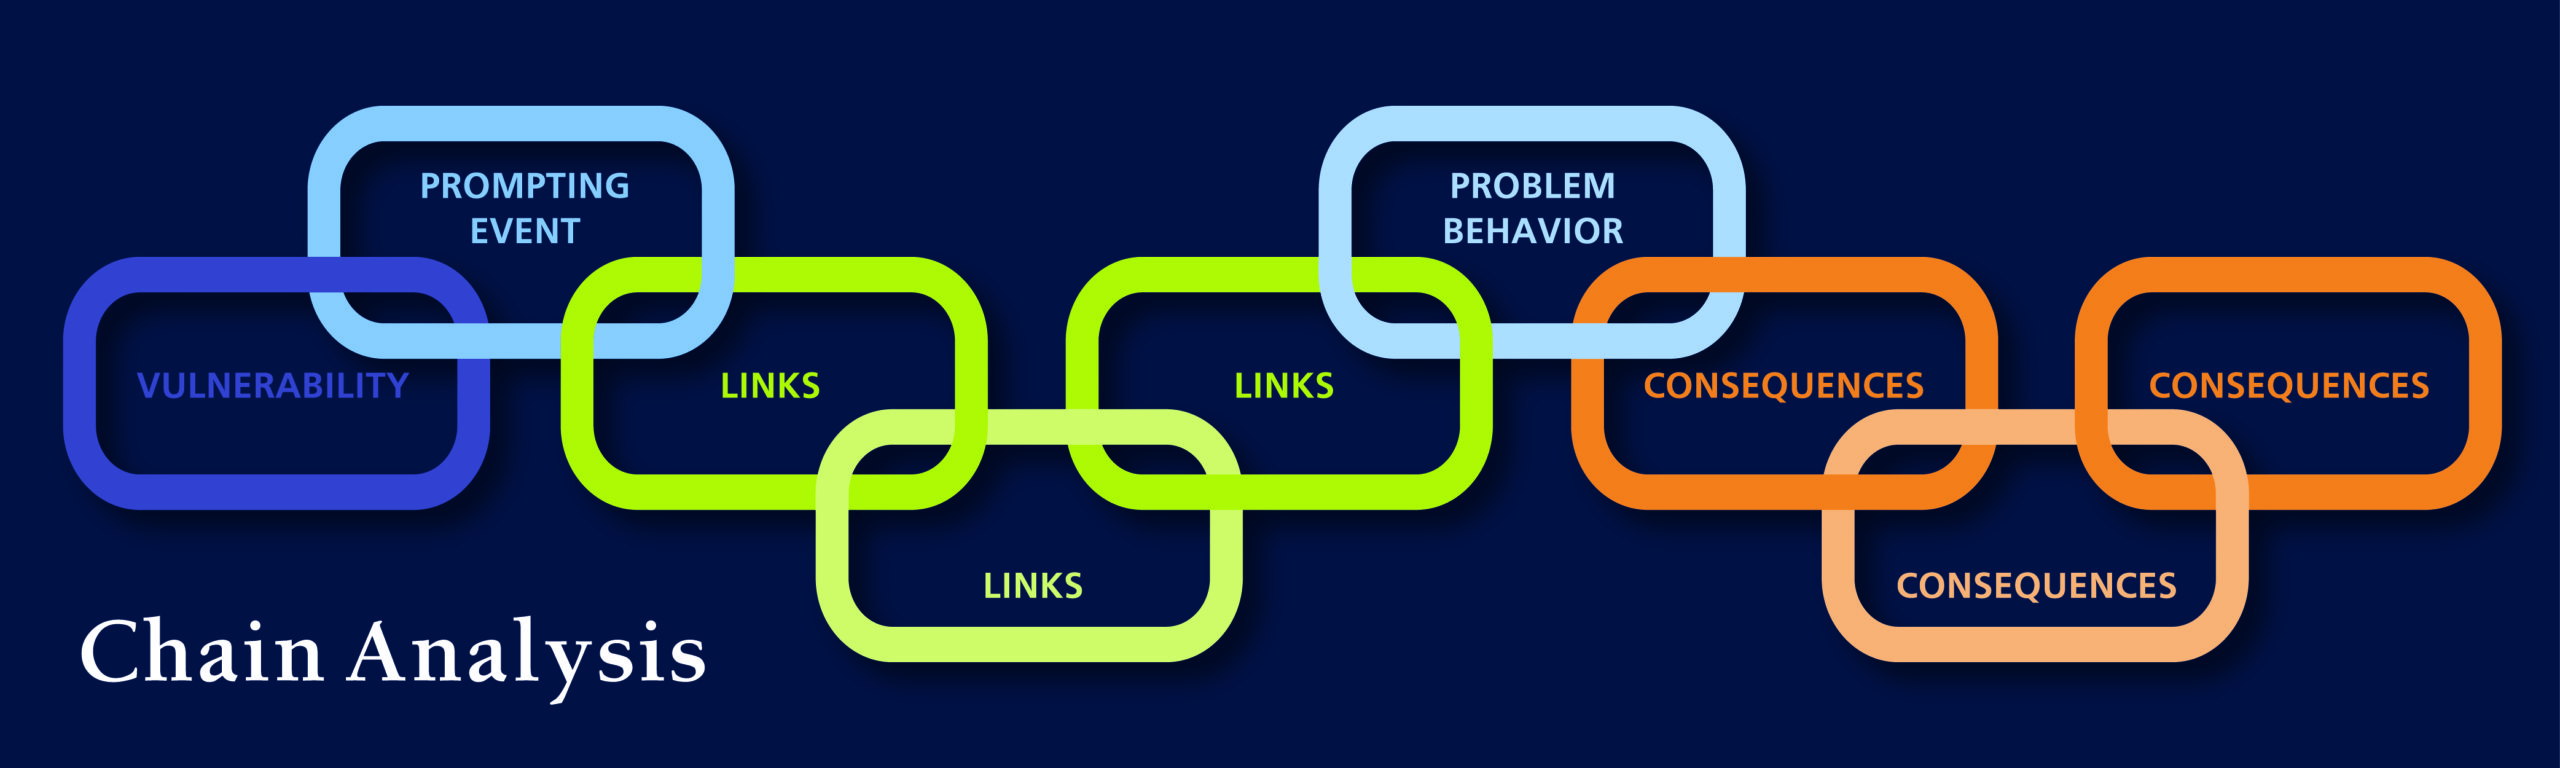 Chain Analysis: Vulnerability, Prompting Event, Links, Links, Links, Problem Behavior, Consequences, Consequences, Consequences